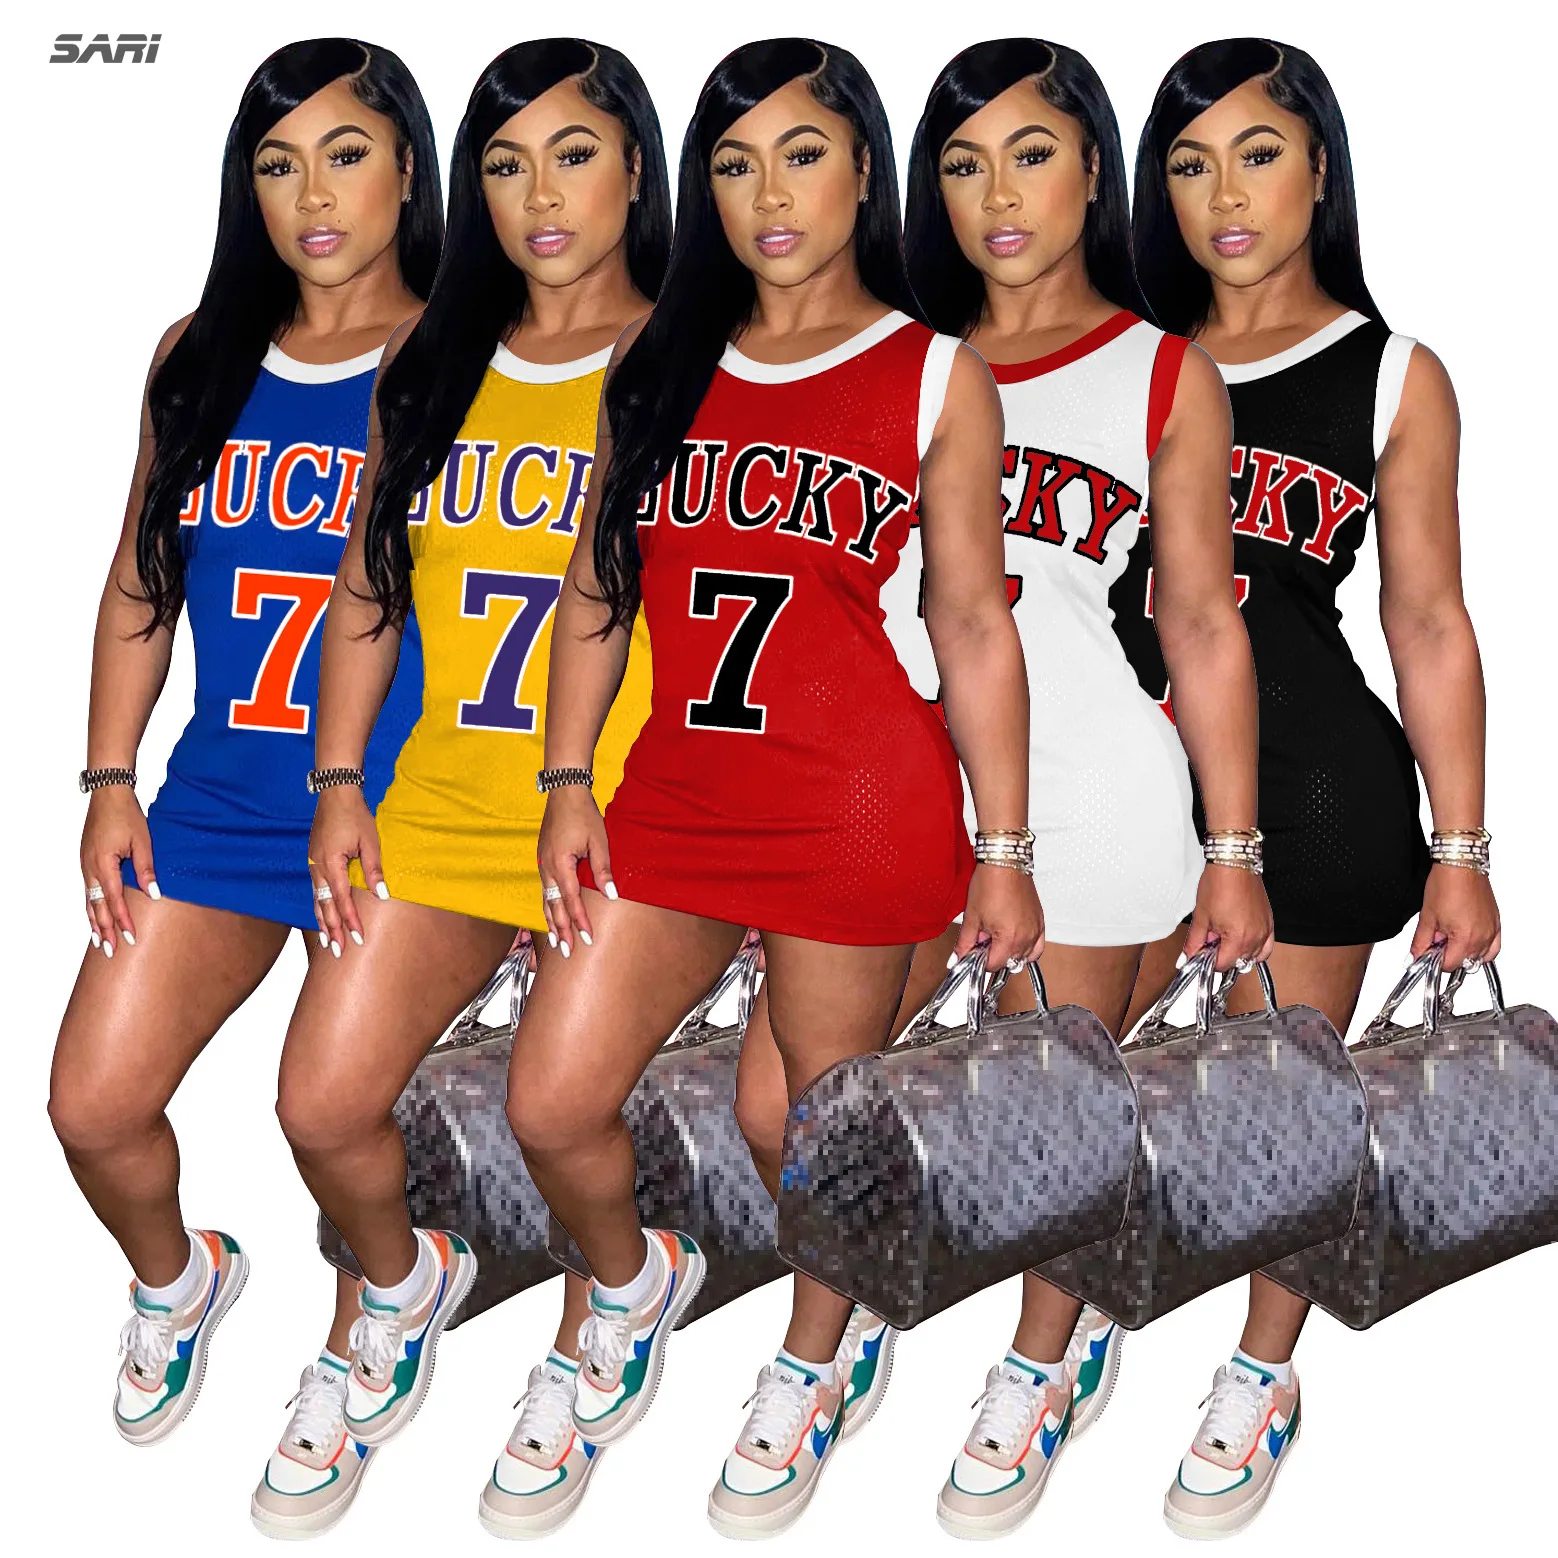 

Summer Women Mesh Dress Campus Style Letter Print Simple Sports Tank Top Mini Skirt Fashion Round Neck Sleeveless Sexy Clothing